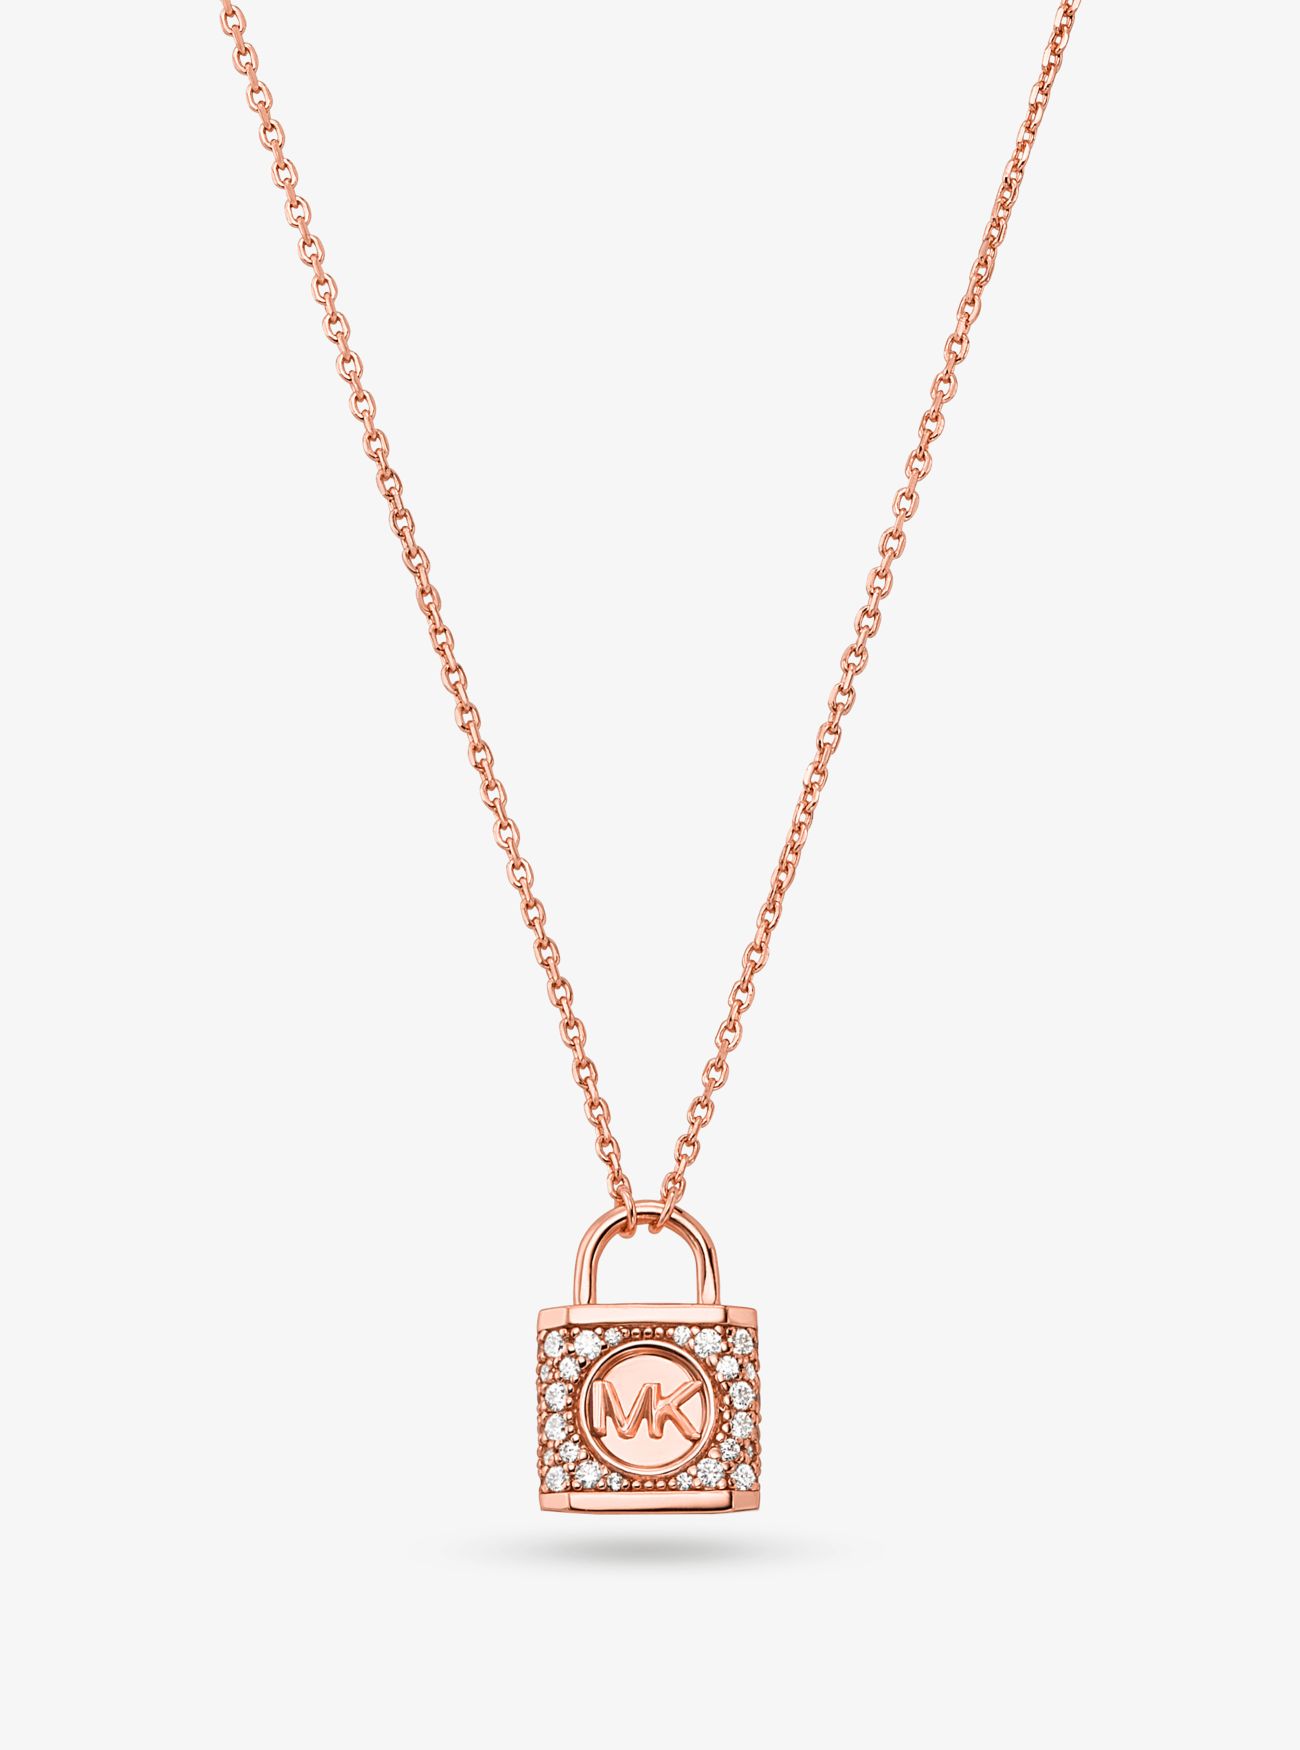 MK Precious Metal-Plated Sterling Silver PavÃ© Lock Necklace - Rose Gold - Michael Kors